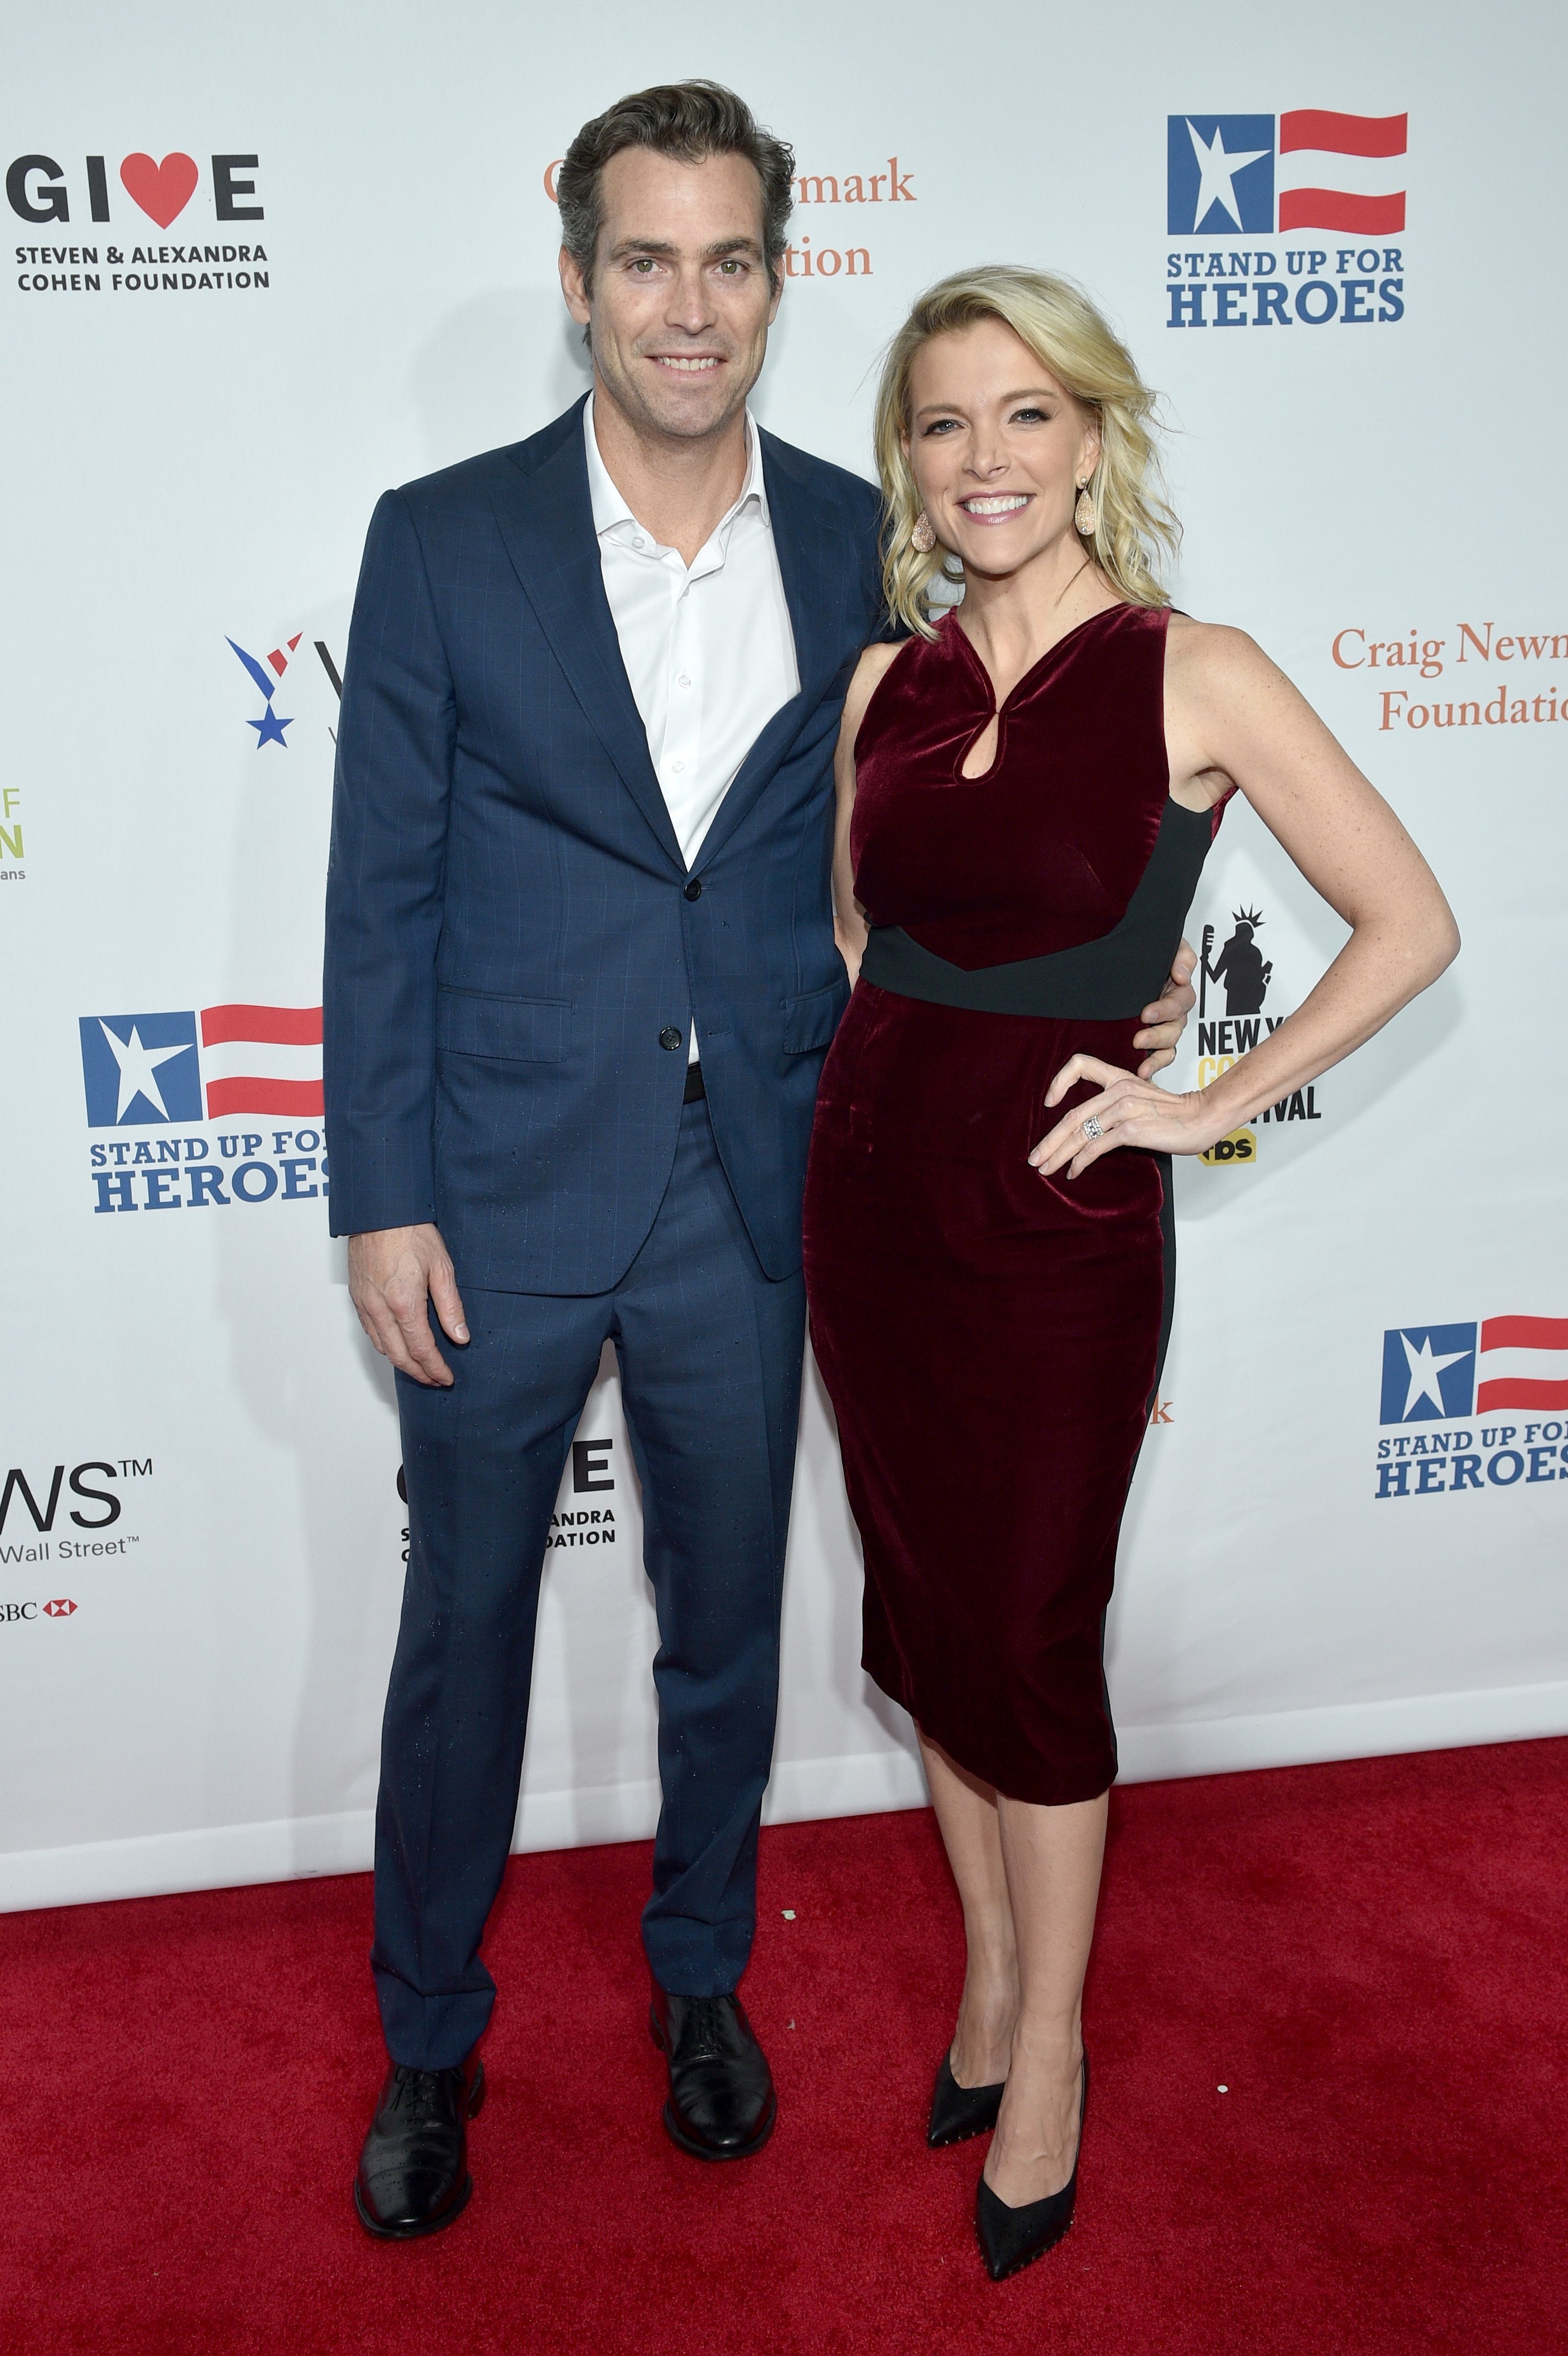 Douglas Brunt and Megyn Kelly attend the 11th Annual Stand Up for Heroes Event presented by The New York Comedy Festival and The Bob Woodruff Foundation at The Theater at Madison Square Garden on November 7, 2017, in New York City. | Source: Getty Images.